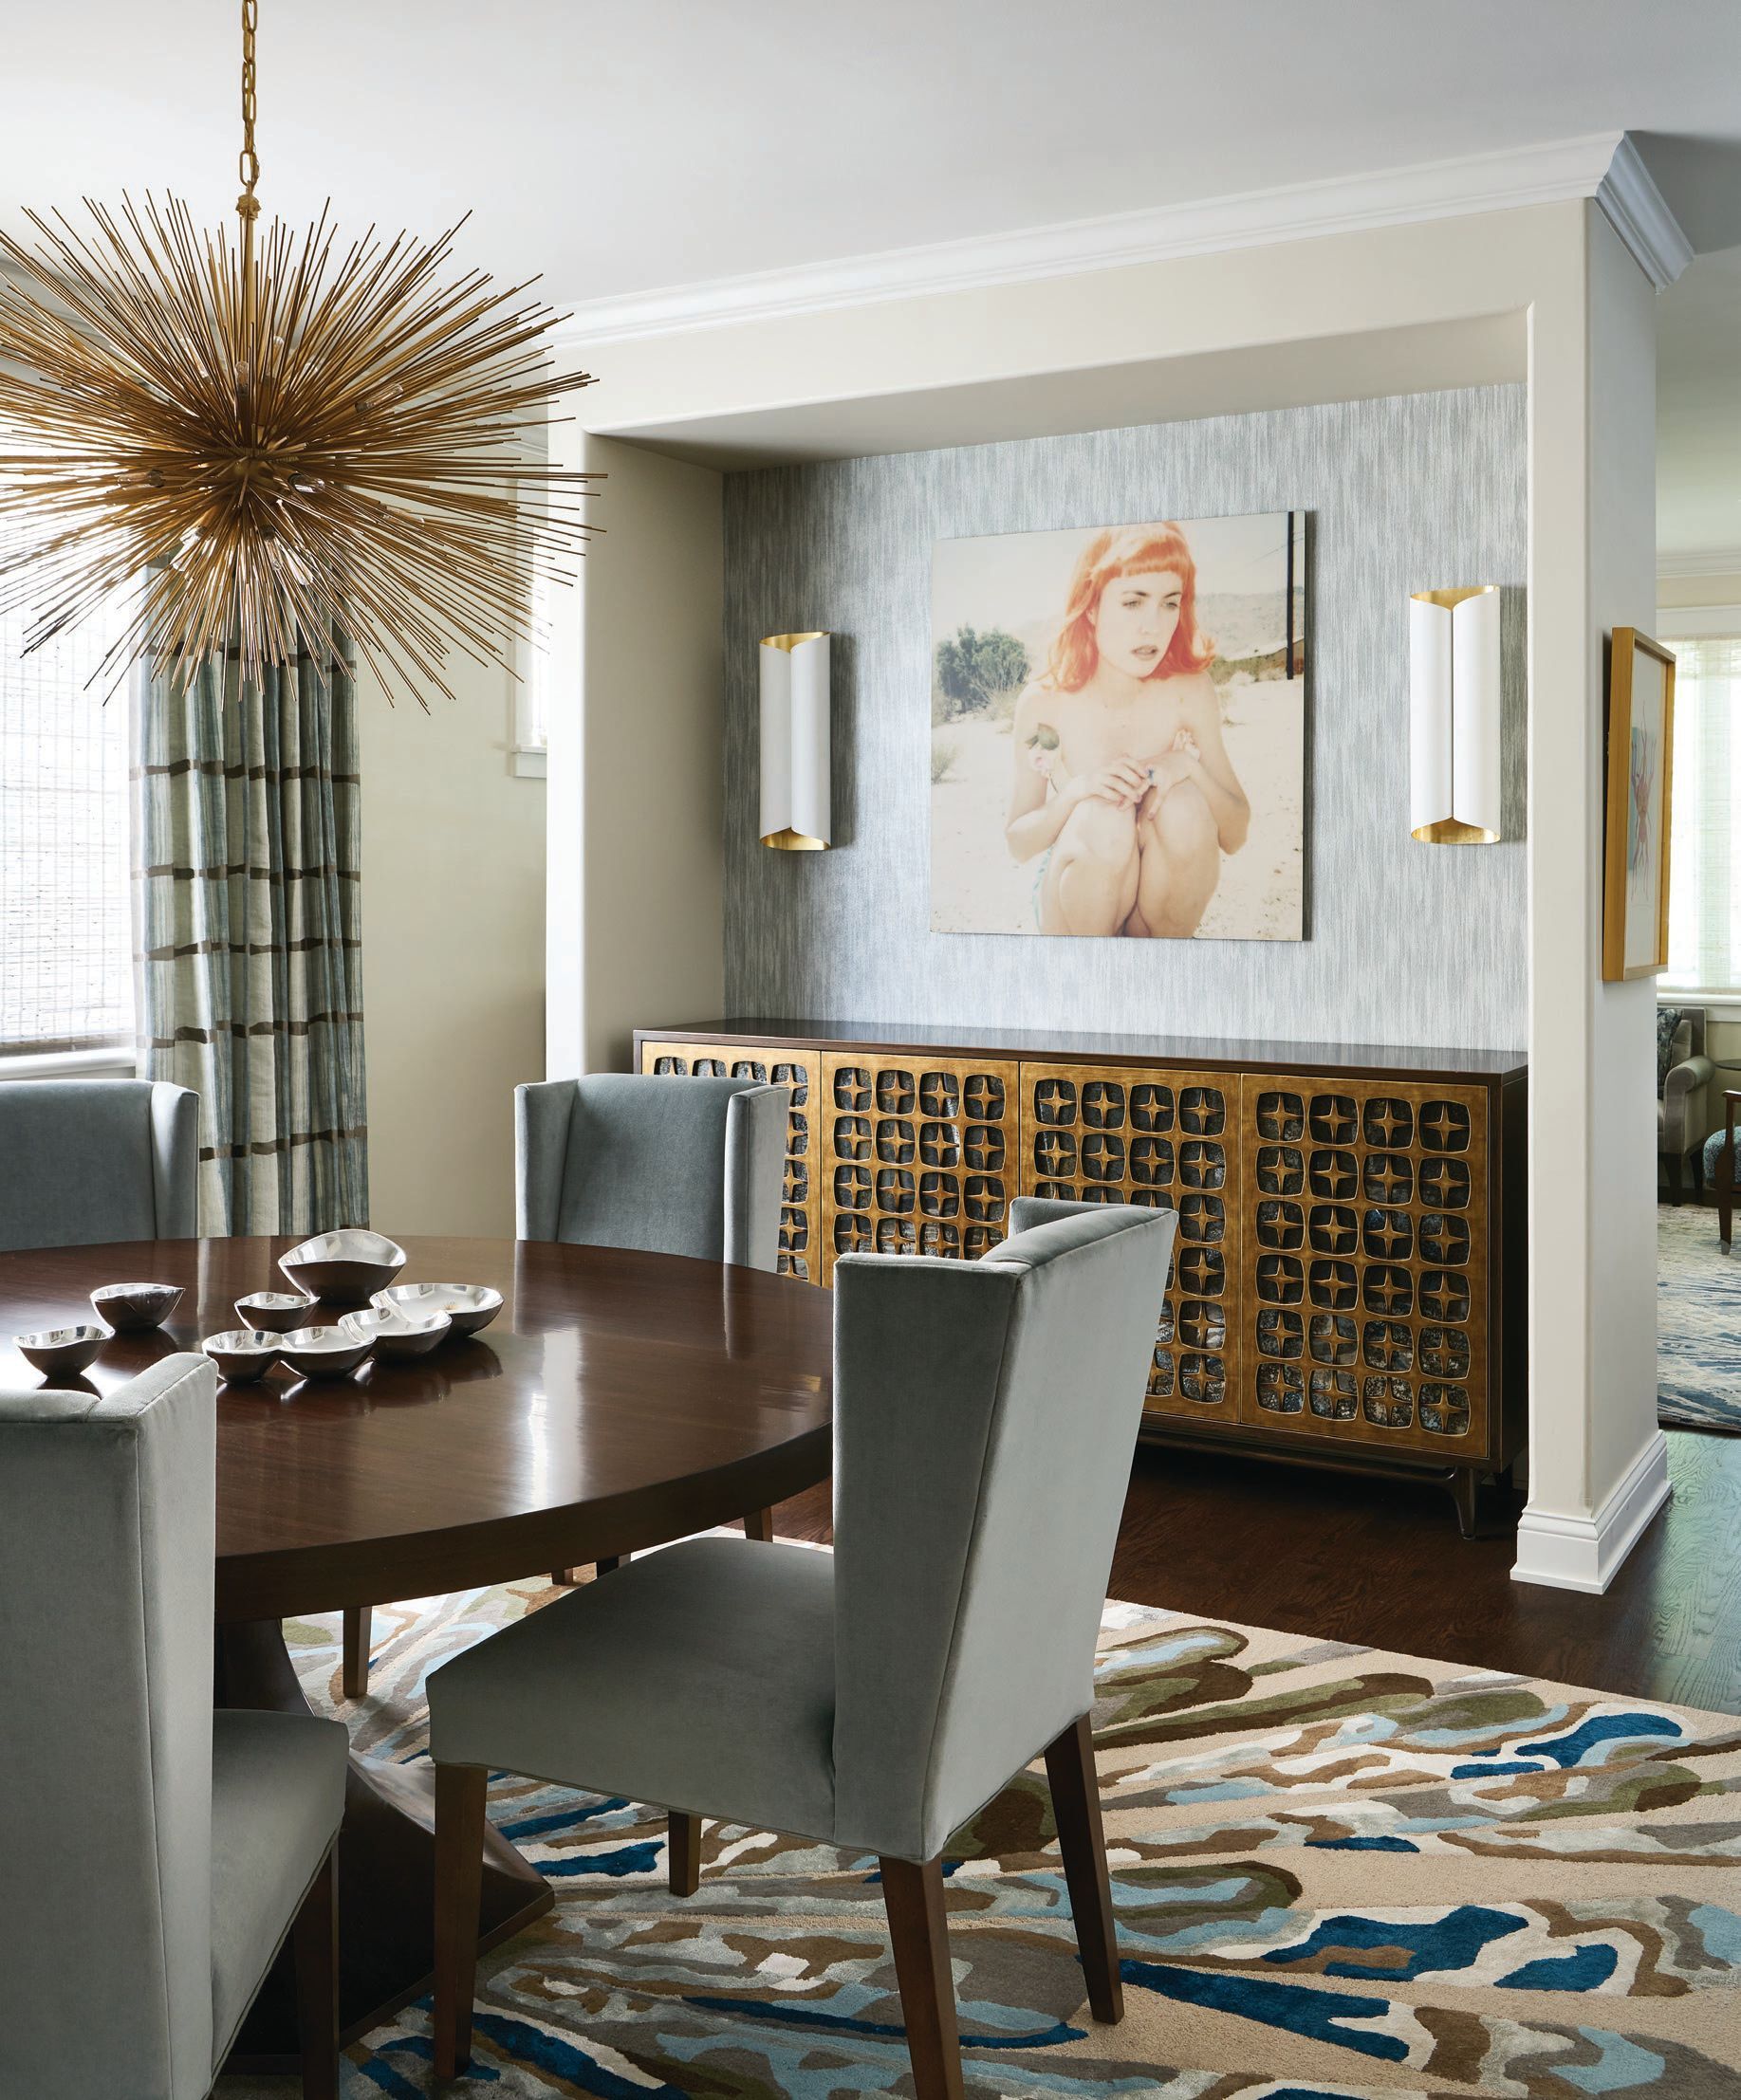 Visual Comfort’s Strada medium oval chandelier hangs chicly over
the custom table by Old Biscayne Designs and custom chairs by Pauline Grace in the dining room, which also features the client’s own artwork and Vinyl Stingray wallcovering by Phillip Jeffries purchased through Holly Hunt. Photographed by Ryan McDonald